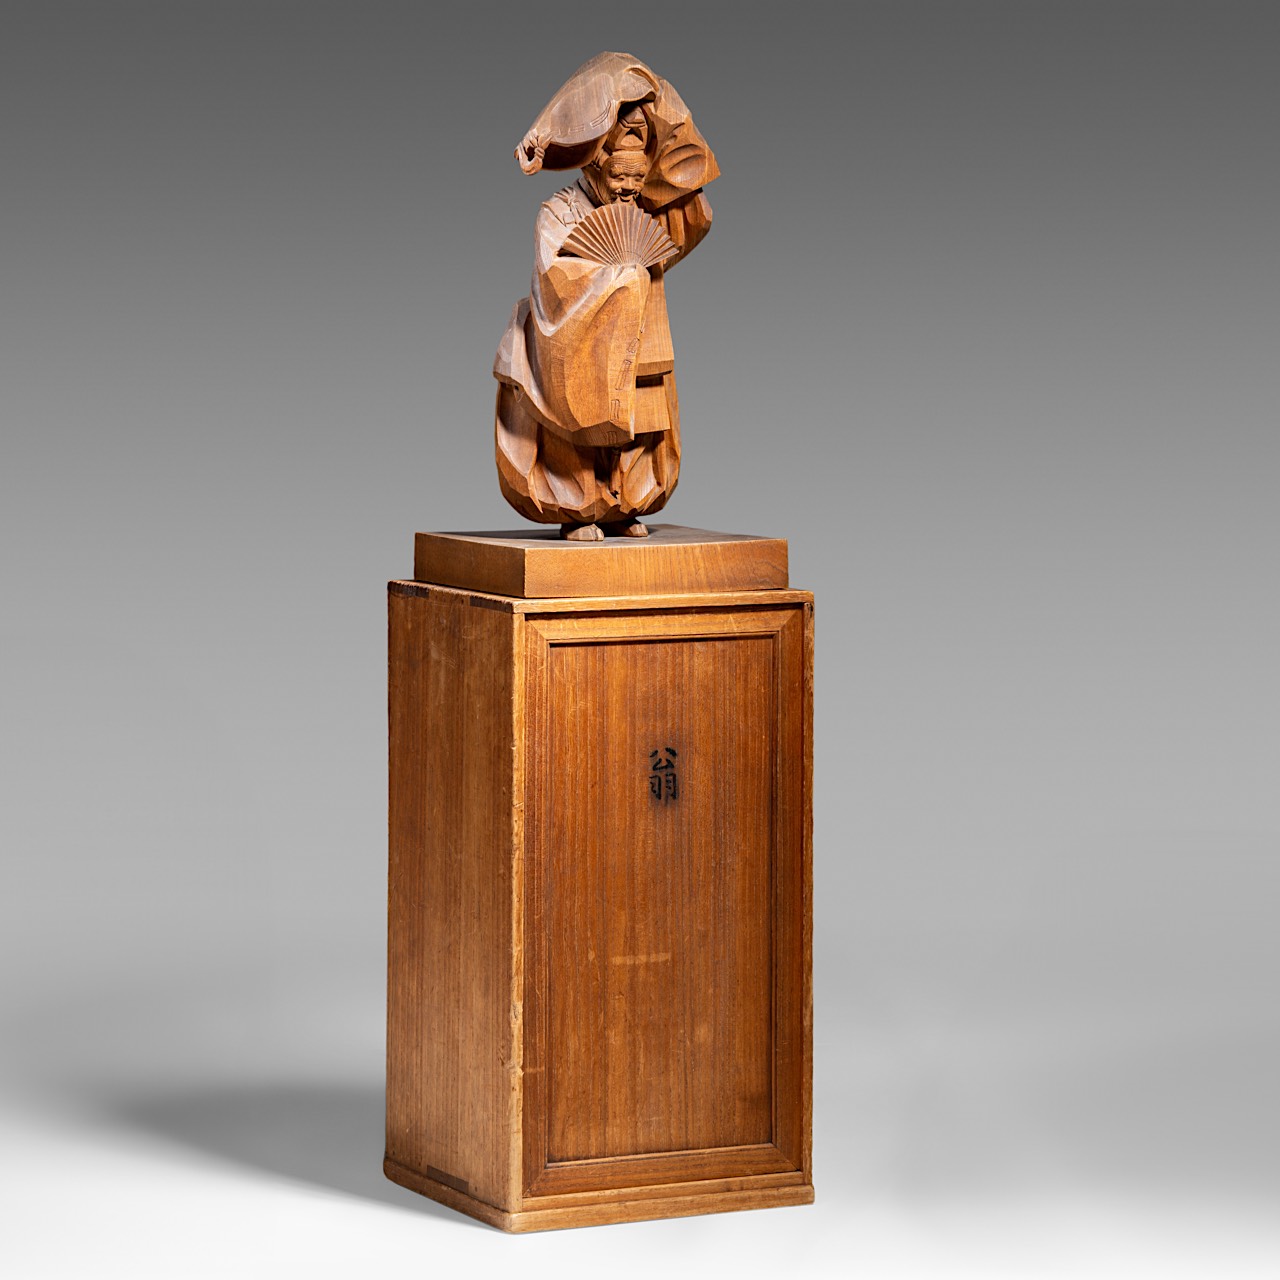 A Japanese cherrywood sculpture of a dancing man, signed Toshiaki Shimamura, total H 47 - 25,5 x 23 - Image 7 of 10